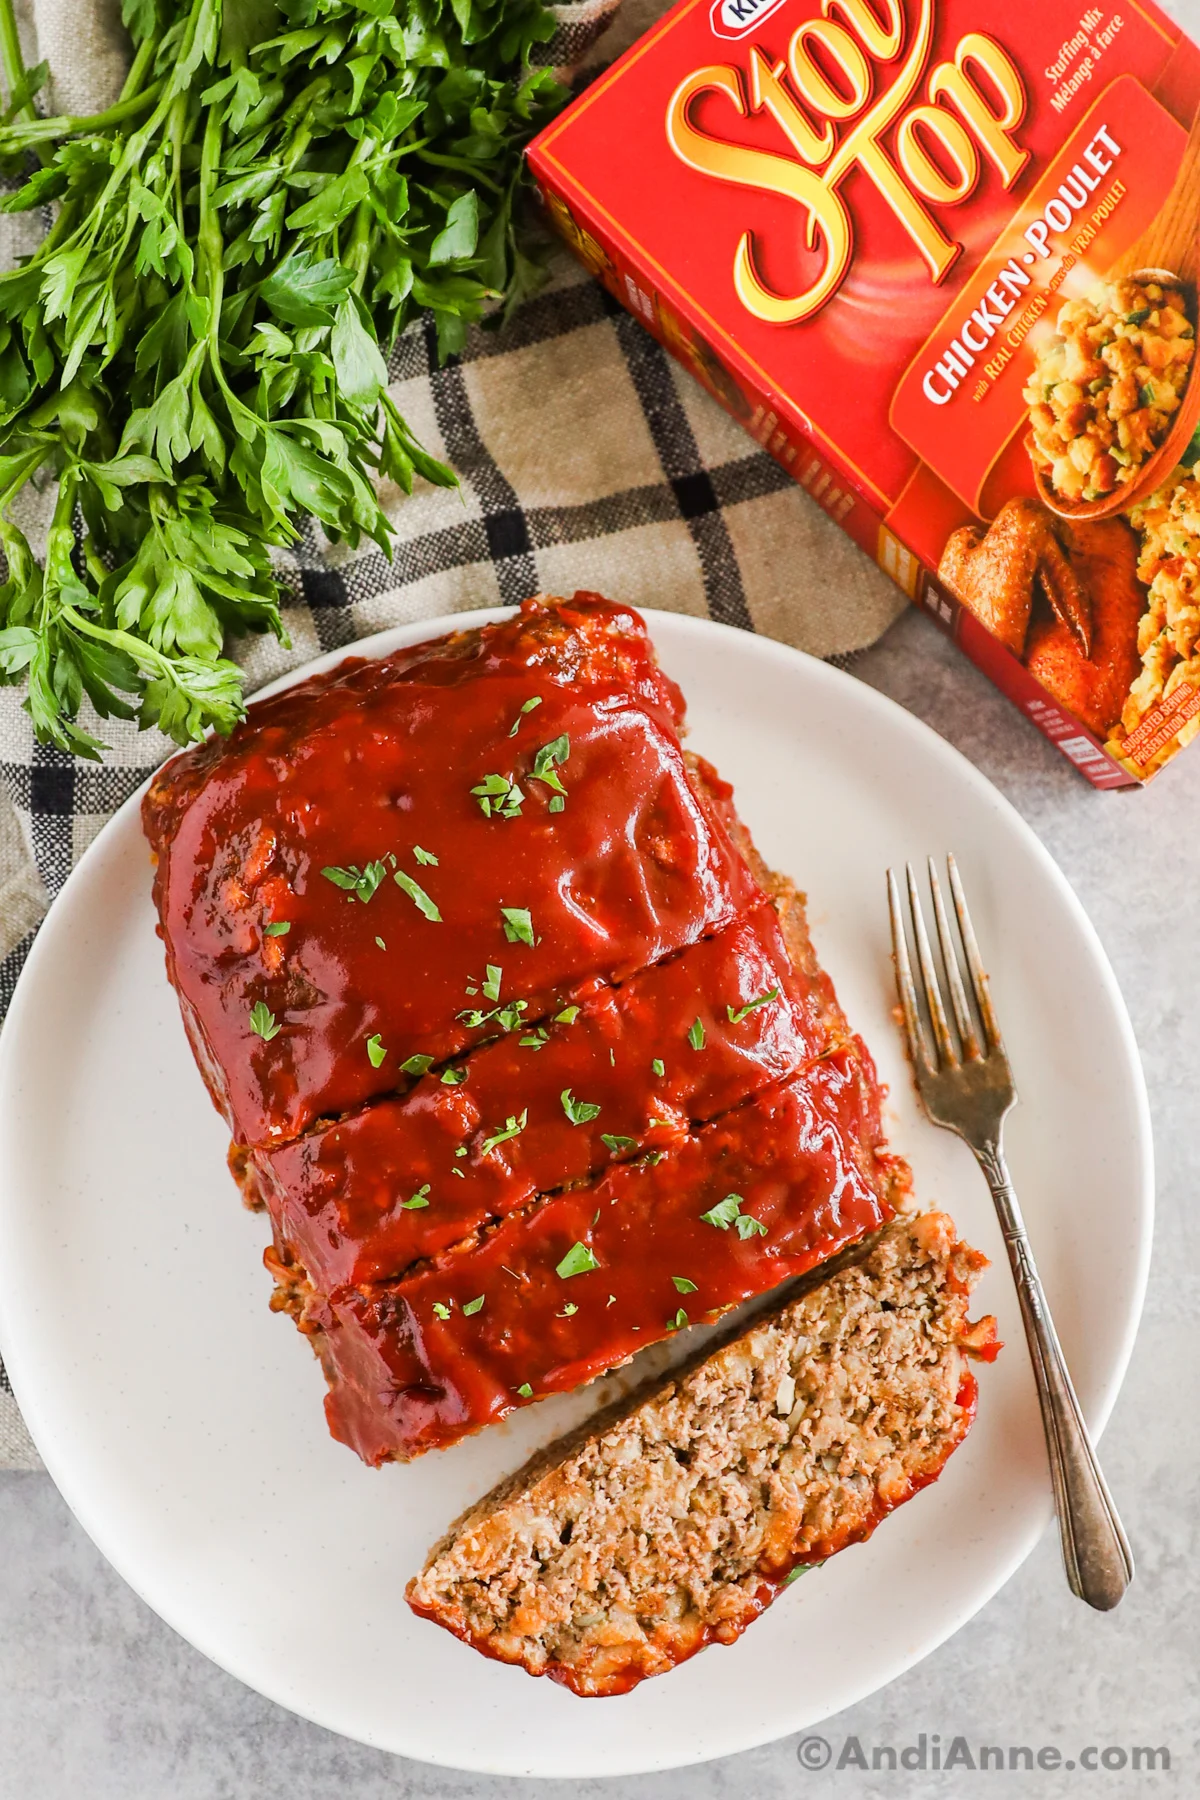 Stove top stuffing meatloaf on a white plate with box of stove top stuffing and bunch of parsley beside it.